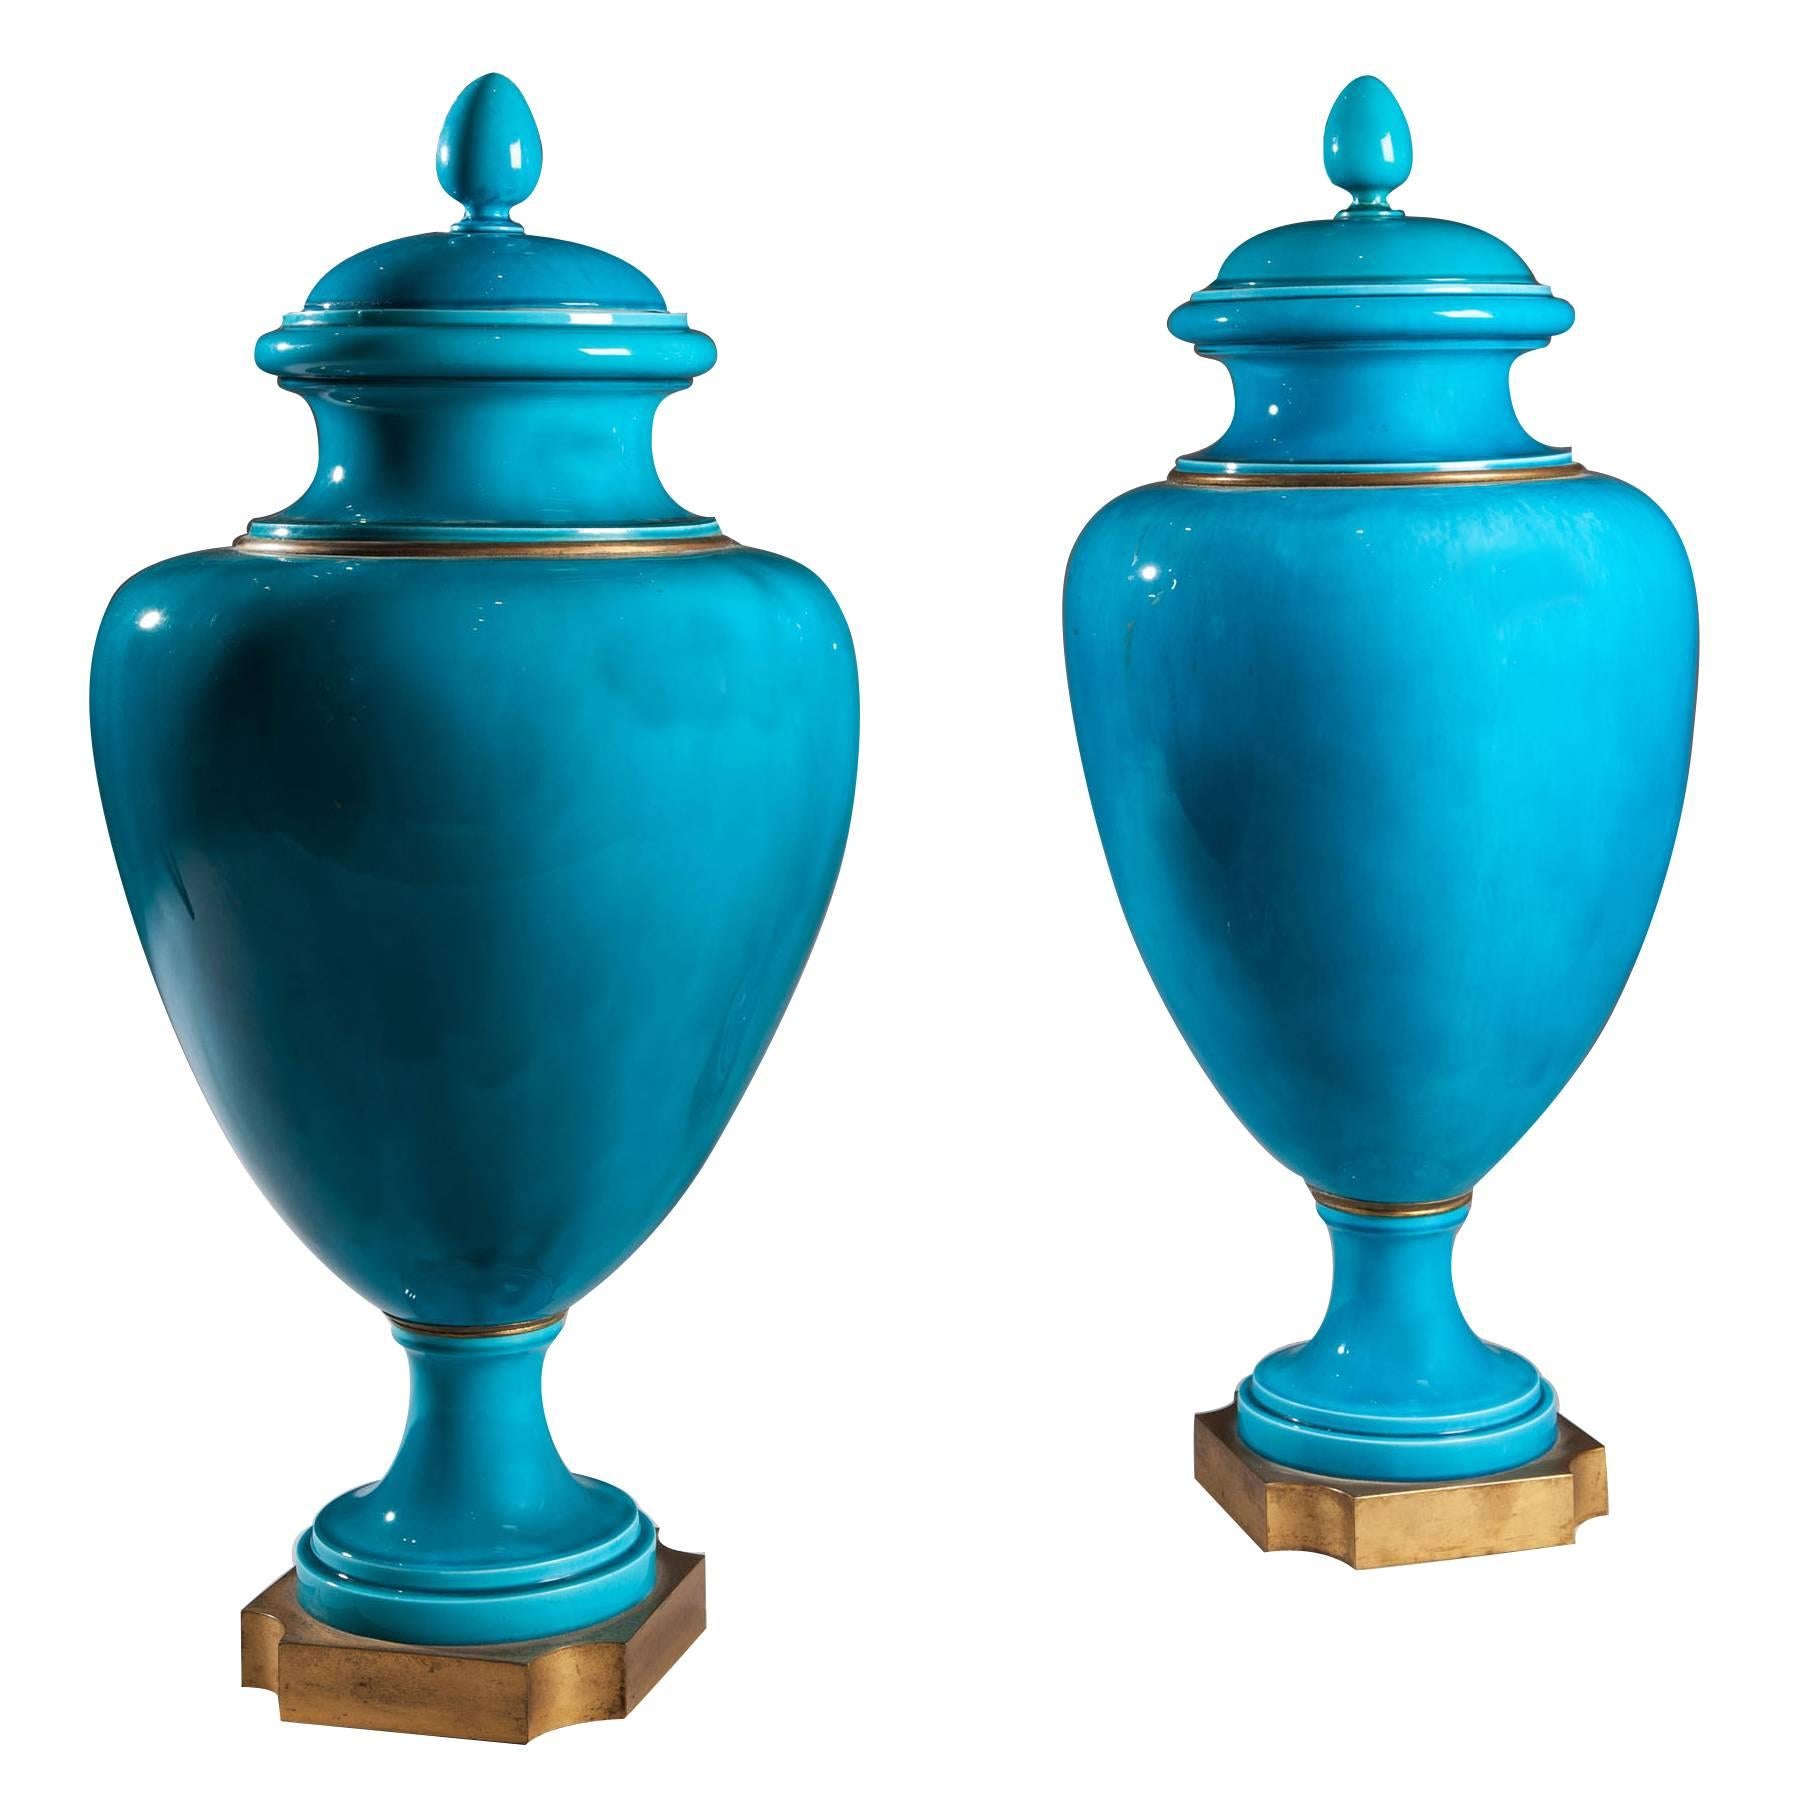 Pair of Turquoise Vases with Covers by Sèvres